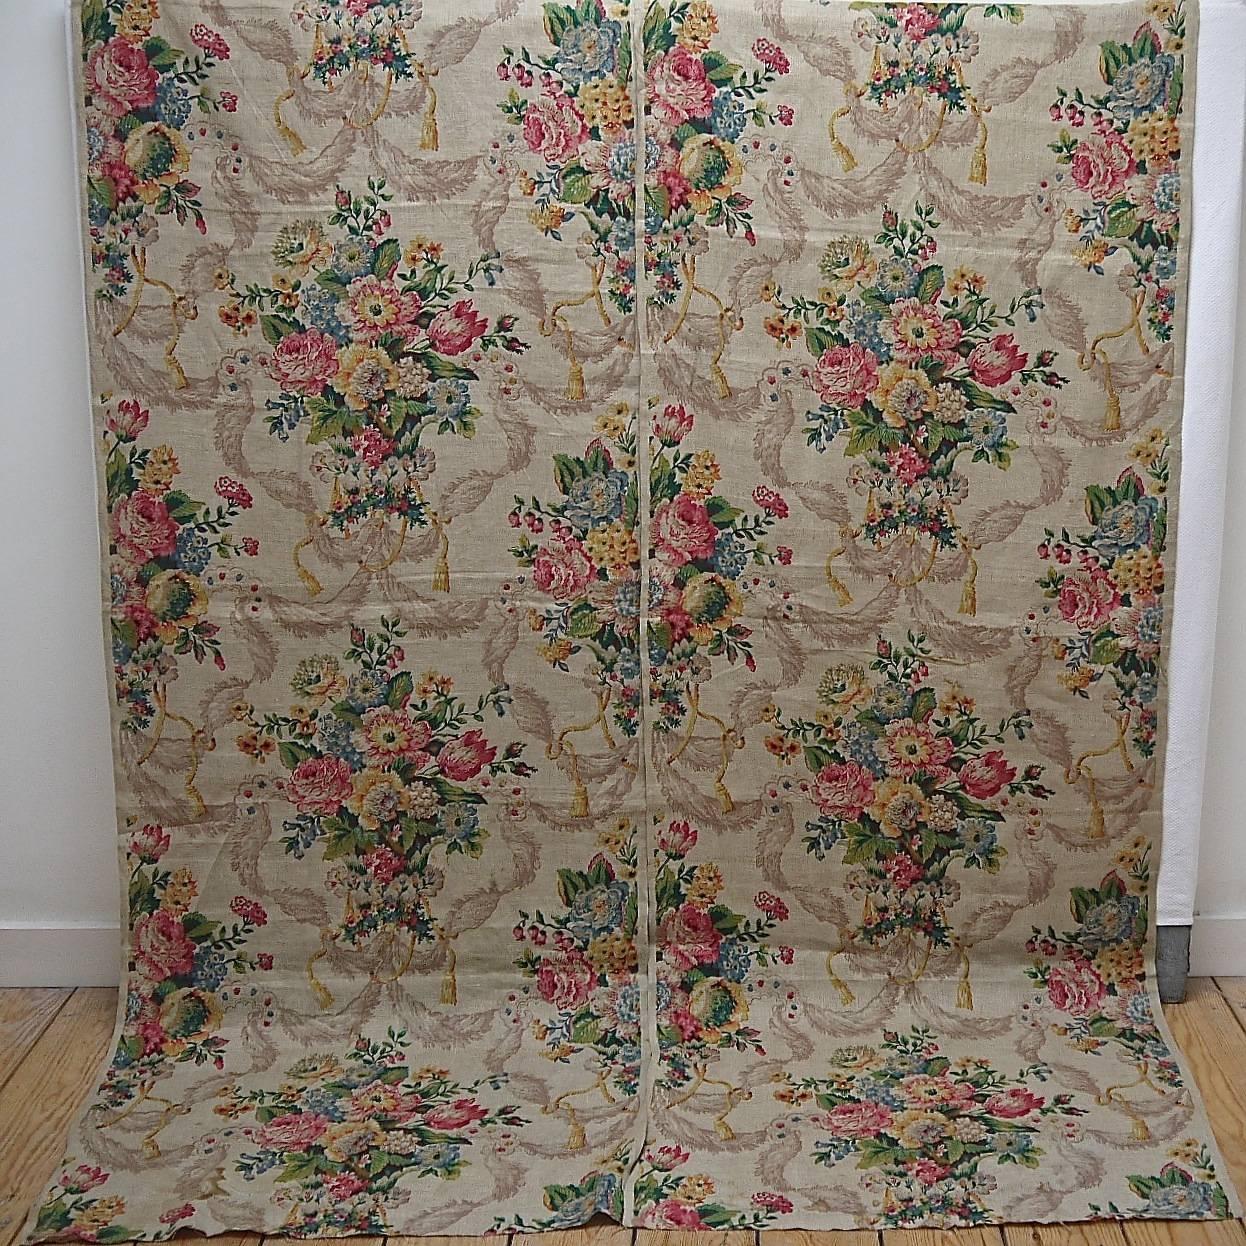 Pair of English, circa 1920s linen panels printed with a large display of mixed flowers in an urn, surrounded by swagged tassels. Lovely colors on a pale beige ground.